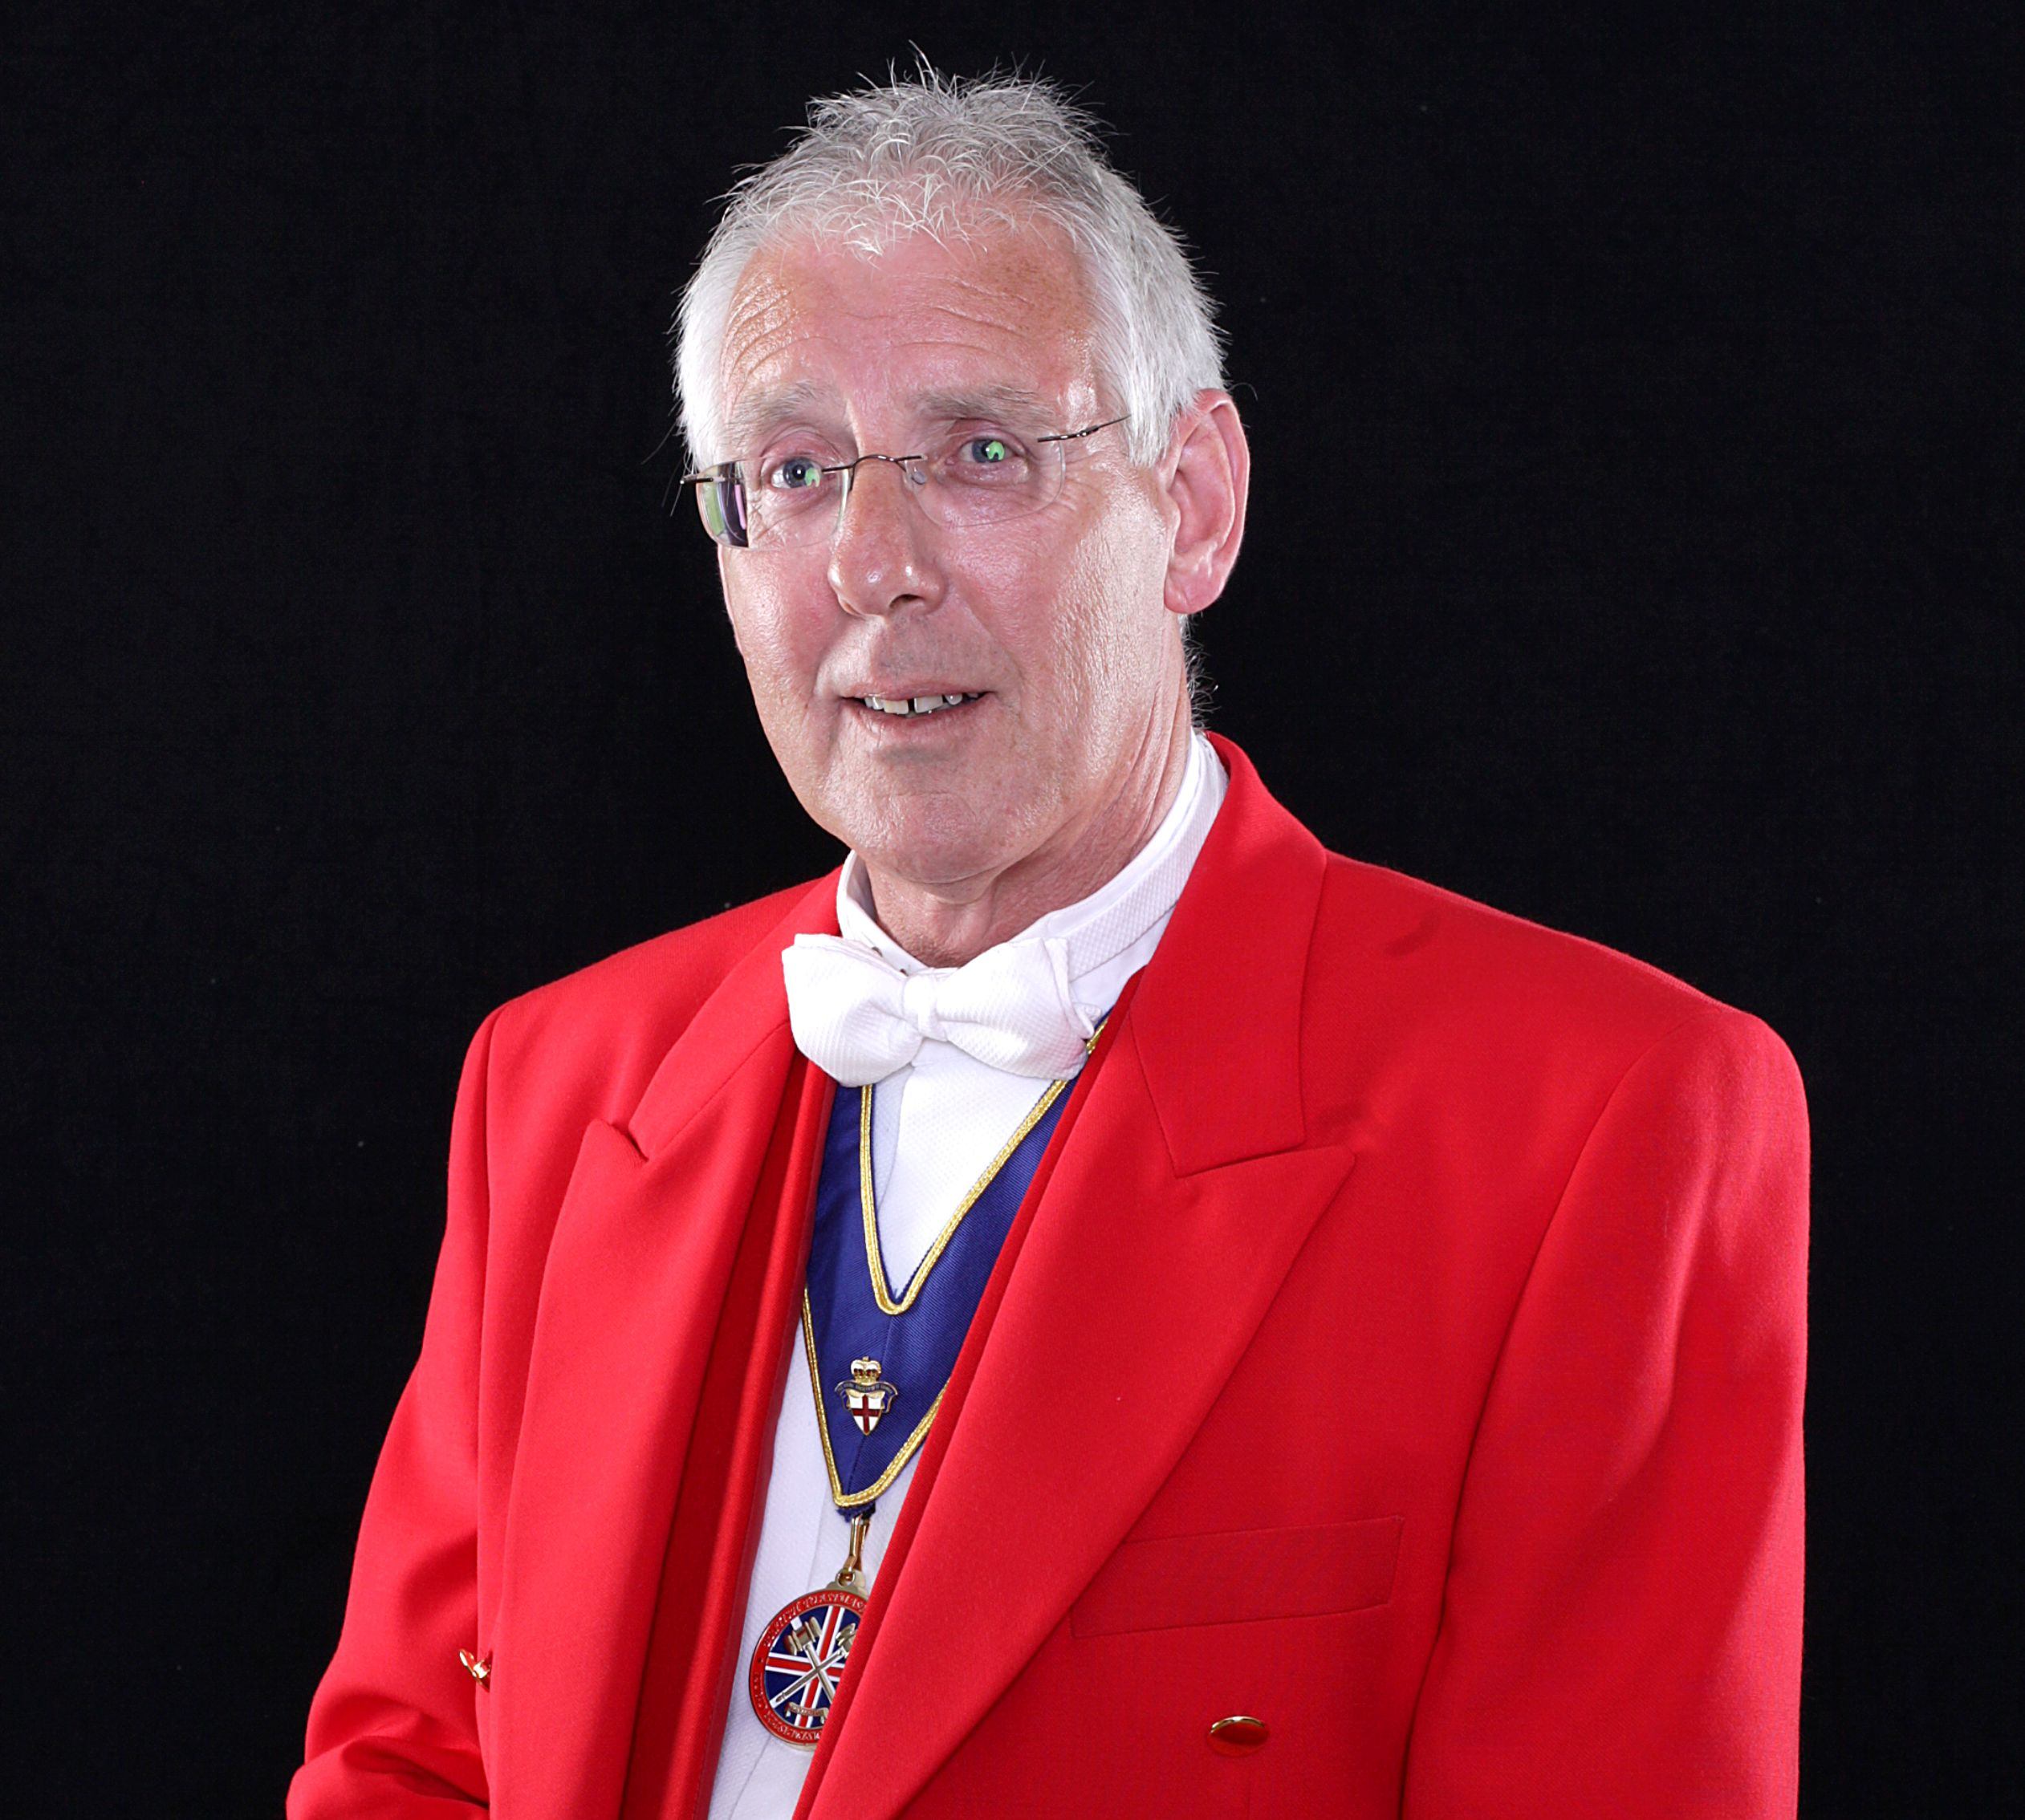 John Driscoll Toastmaster - Connections